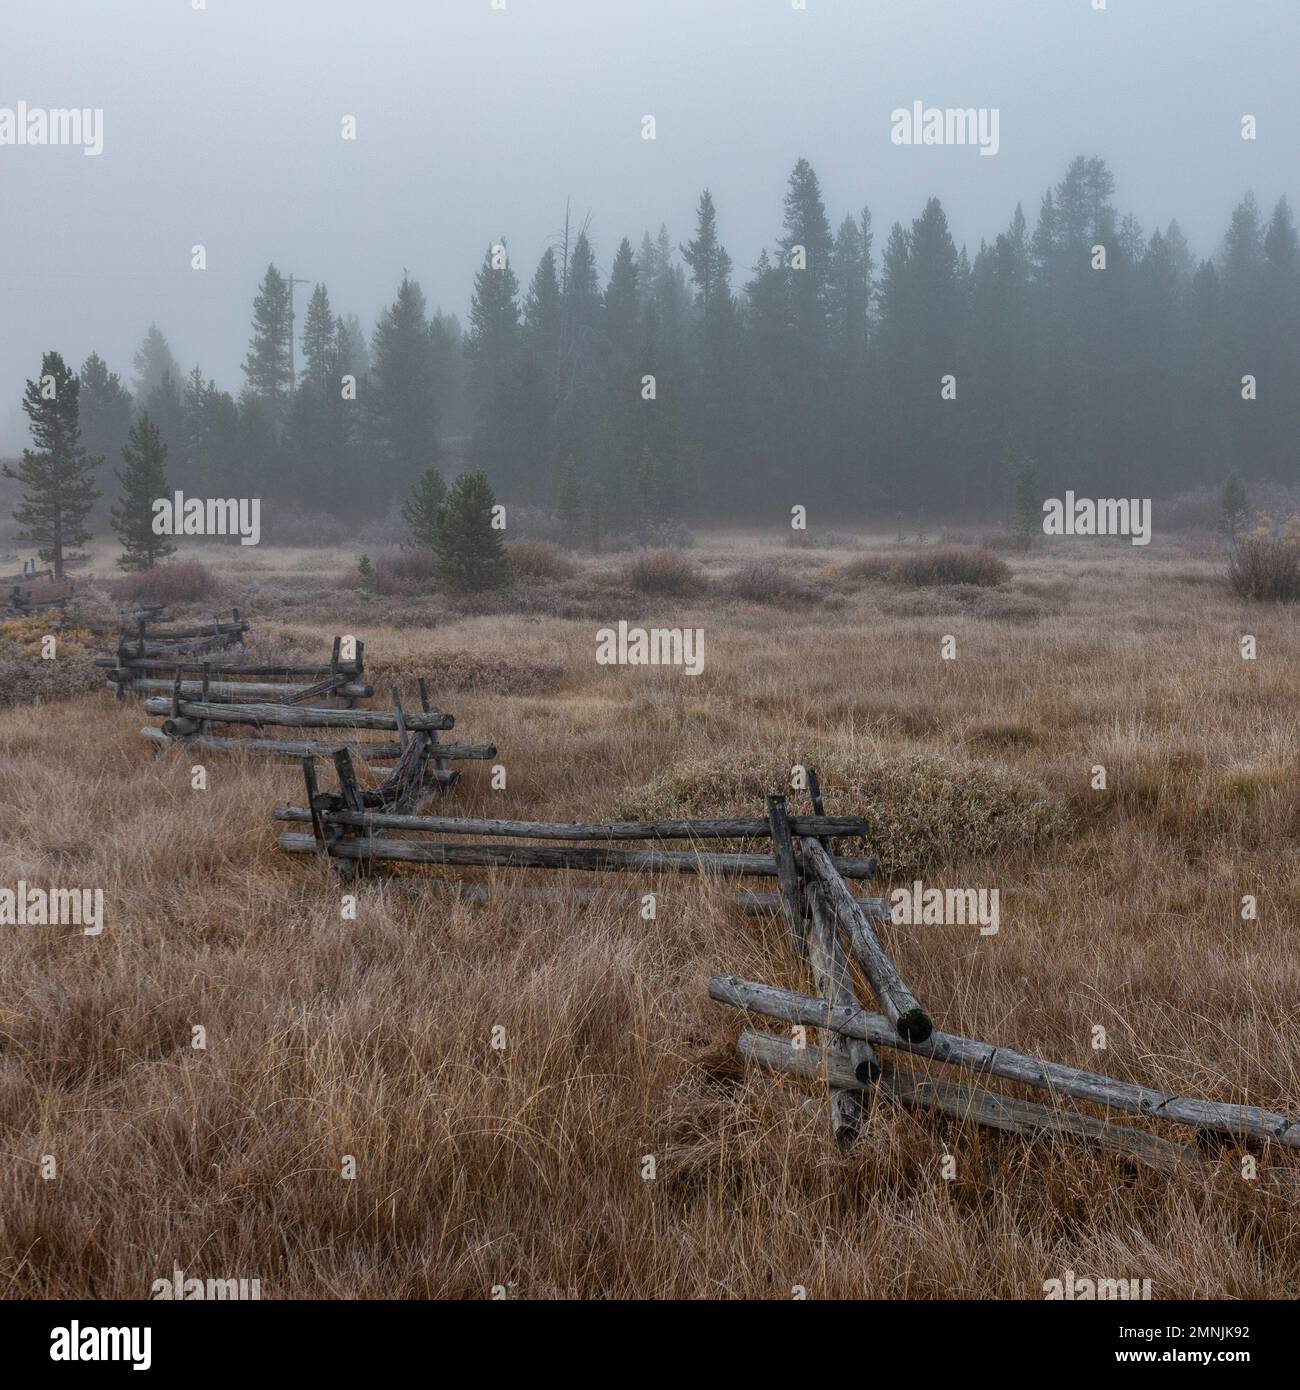 USA, Idaho, Stanley, Rural scene with rail fence and forest Stock Photo